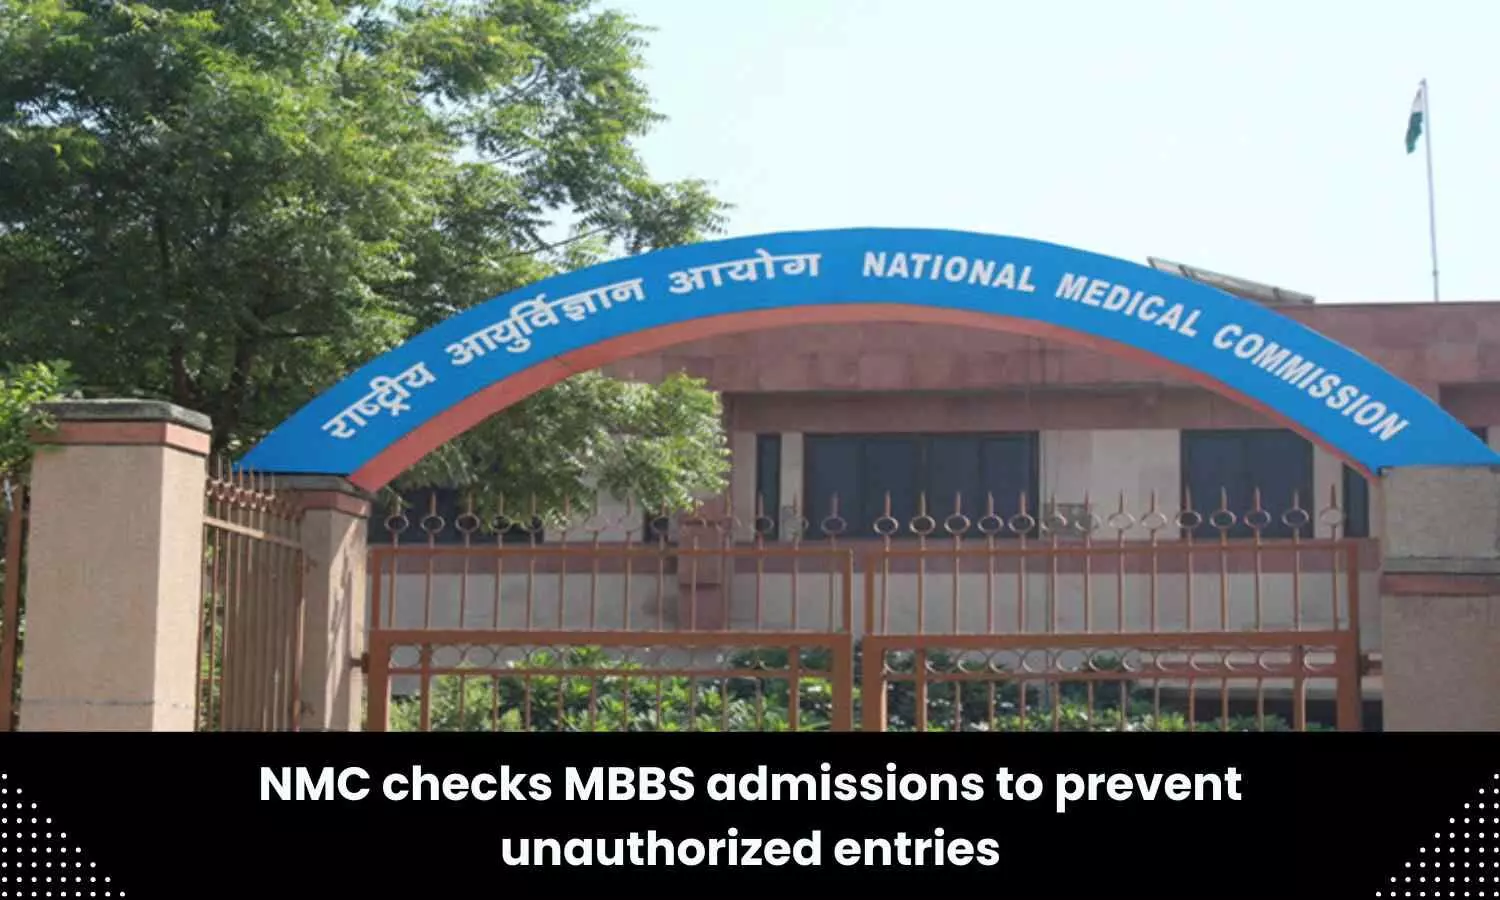 MBBS admissions to be verified by NMC to prevent backdoor entries